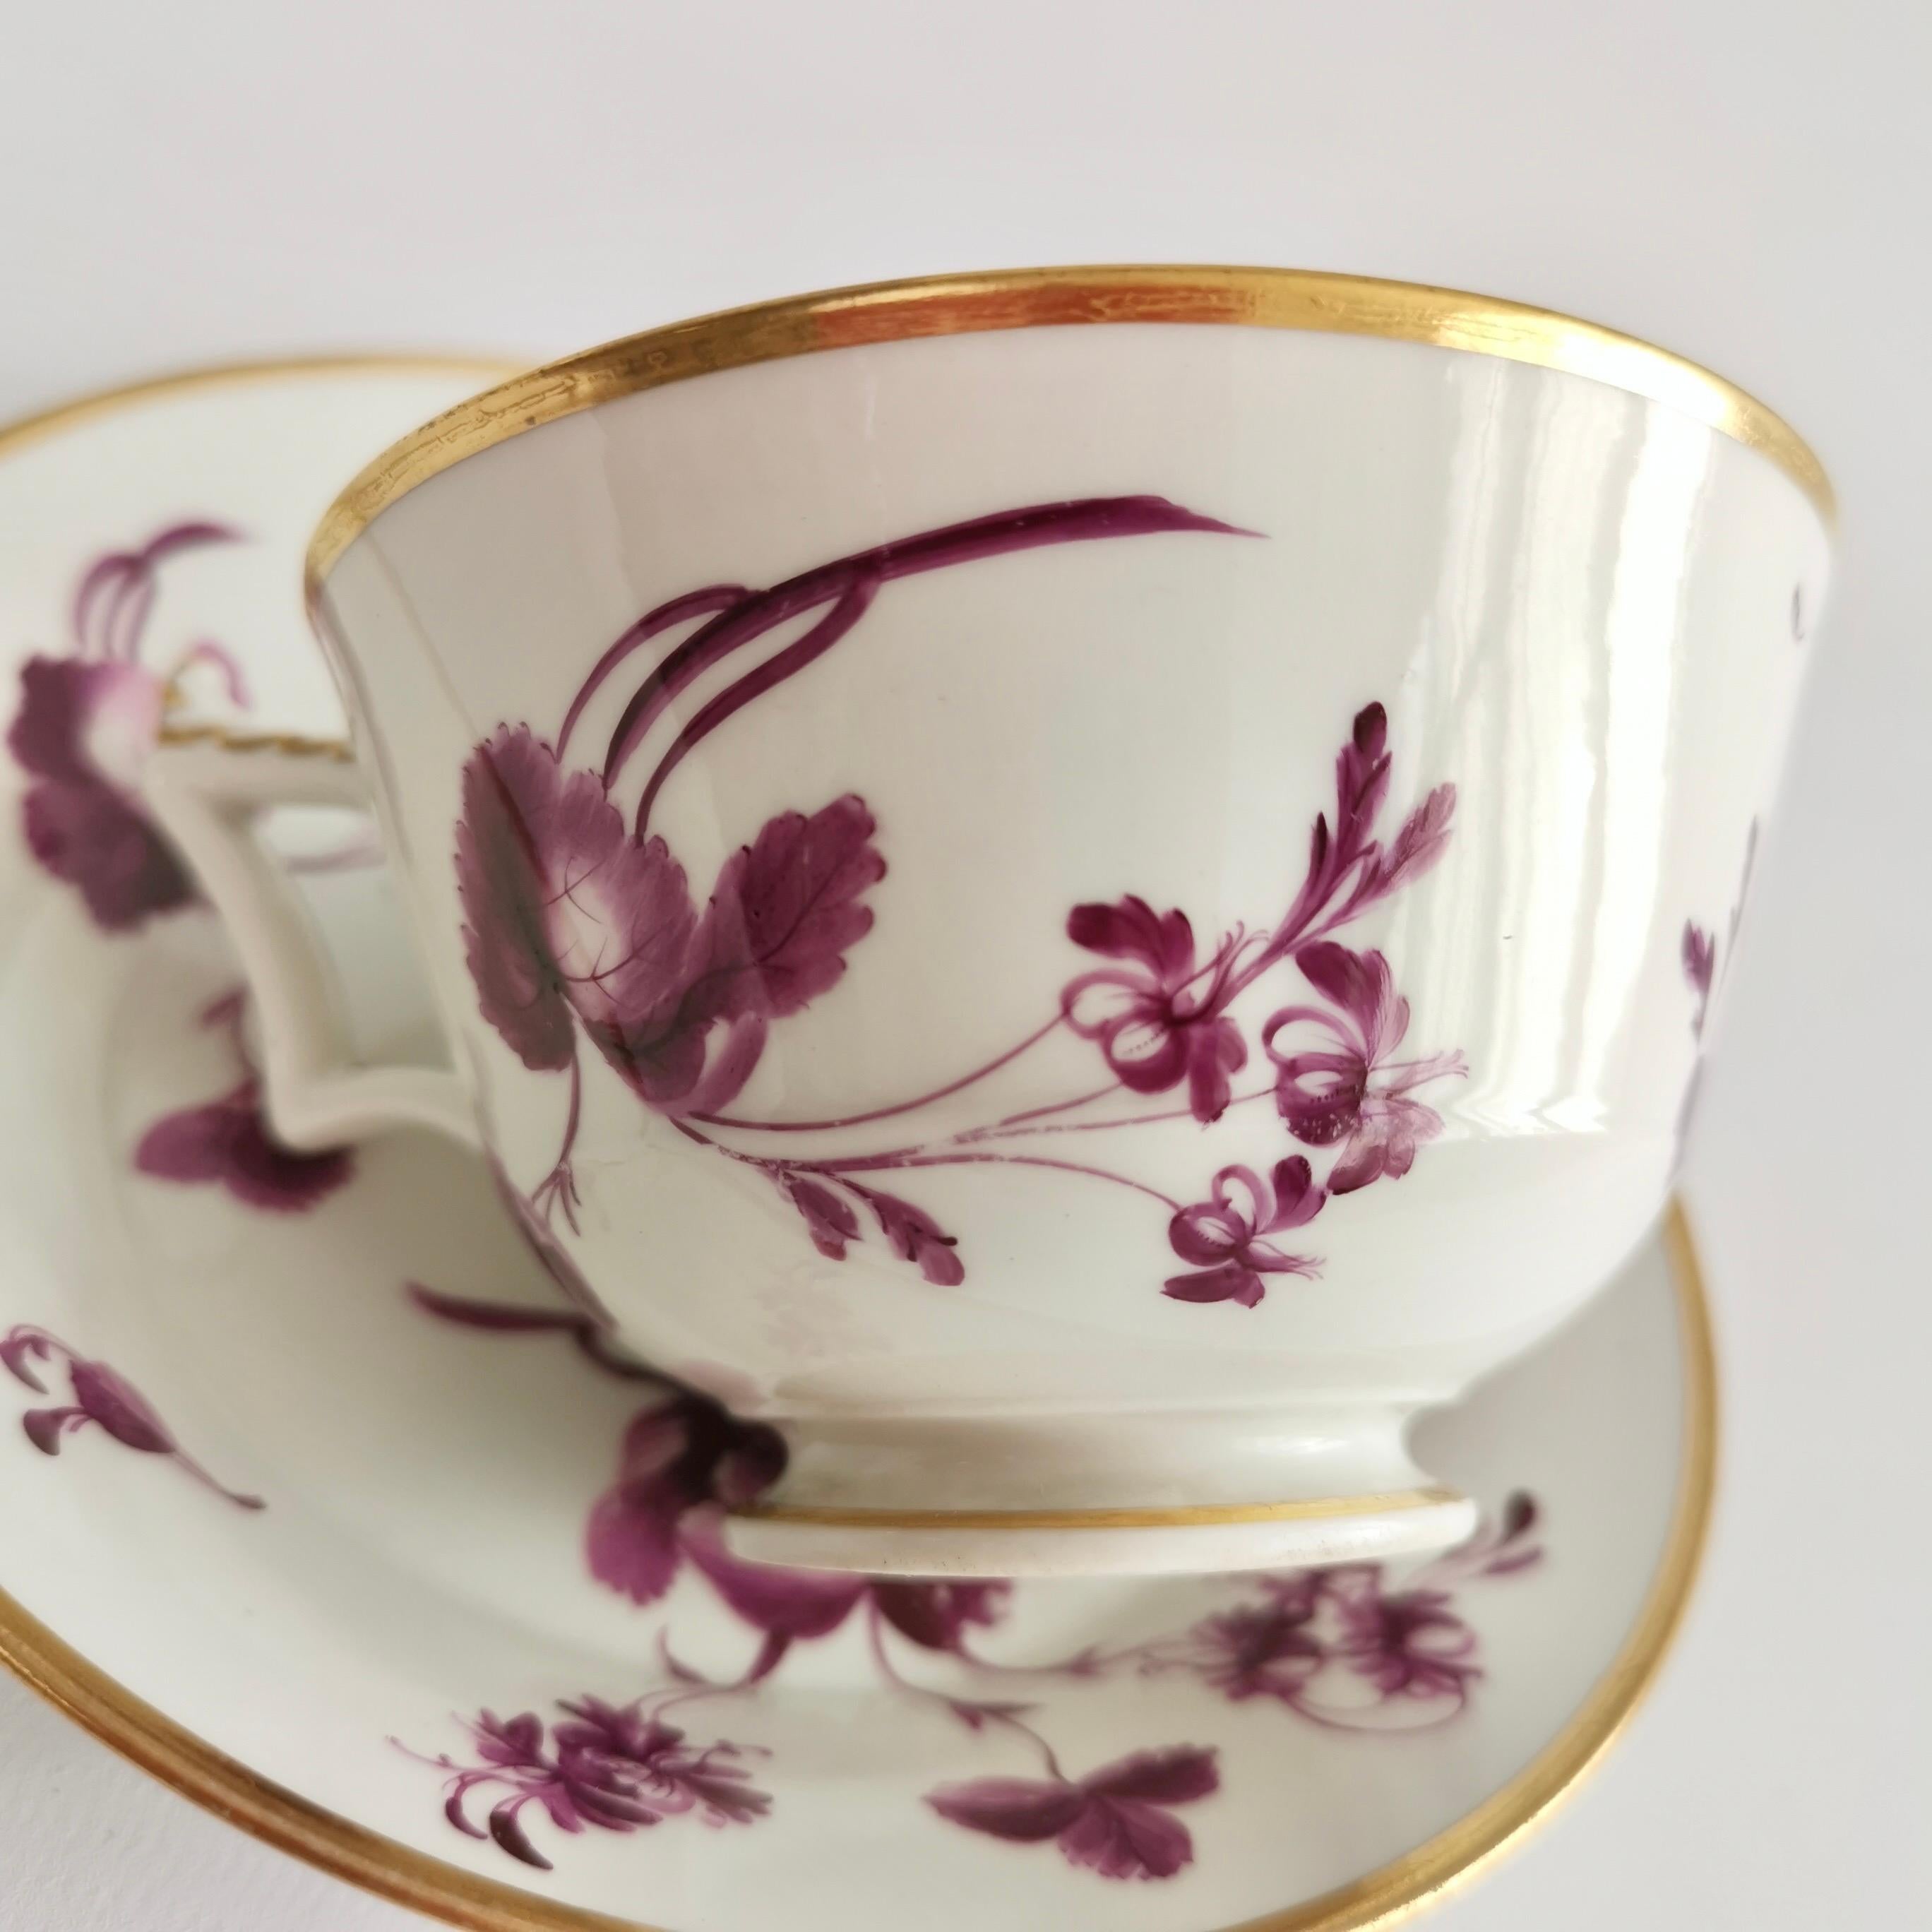 Porcelain Flight Barr and Barr Teacup, White with Puce Flowers, Regency ca 1815